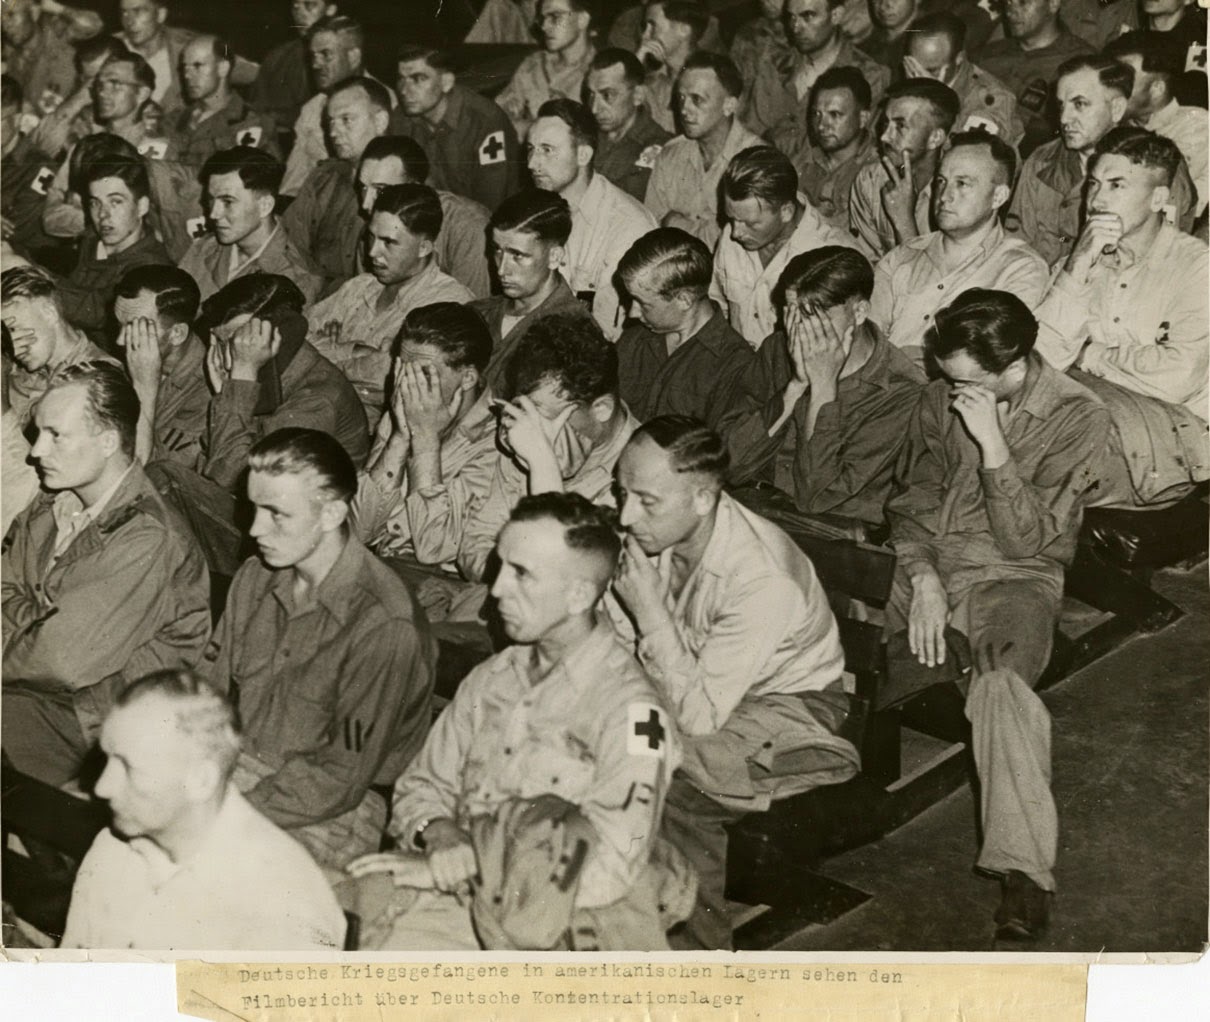 German soldiers react to footage of concentration camps, 1945